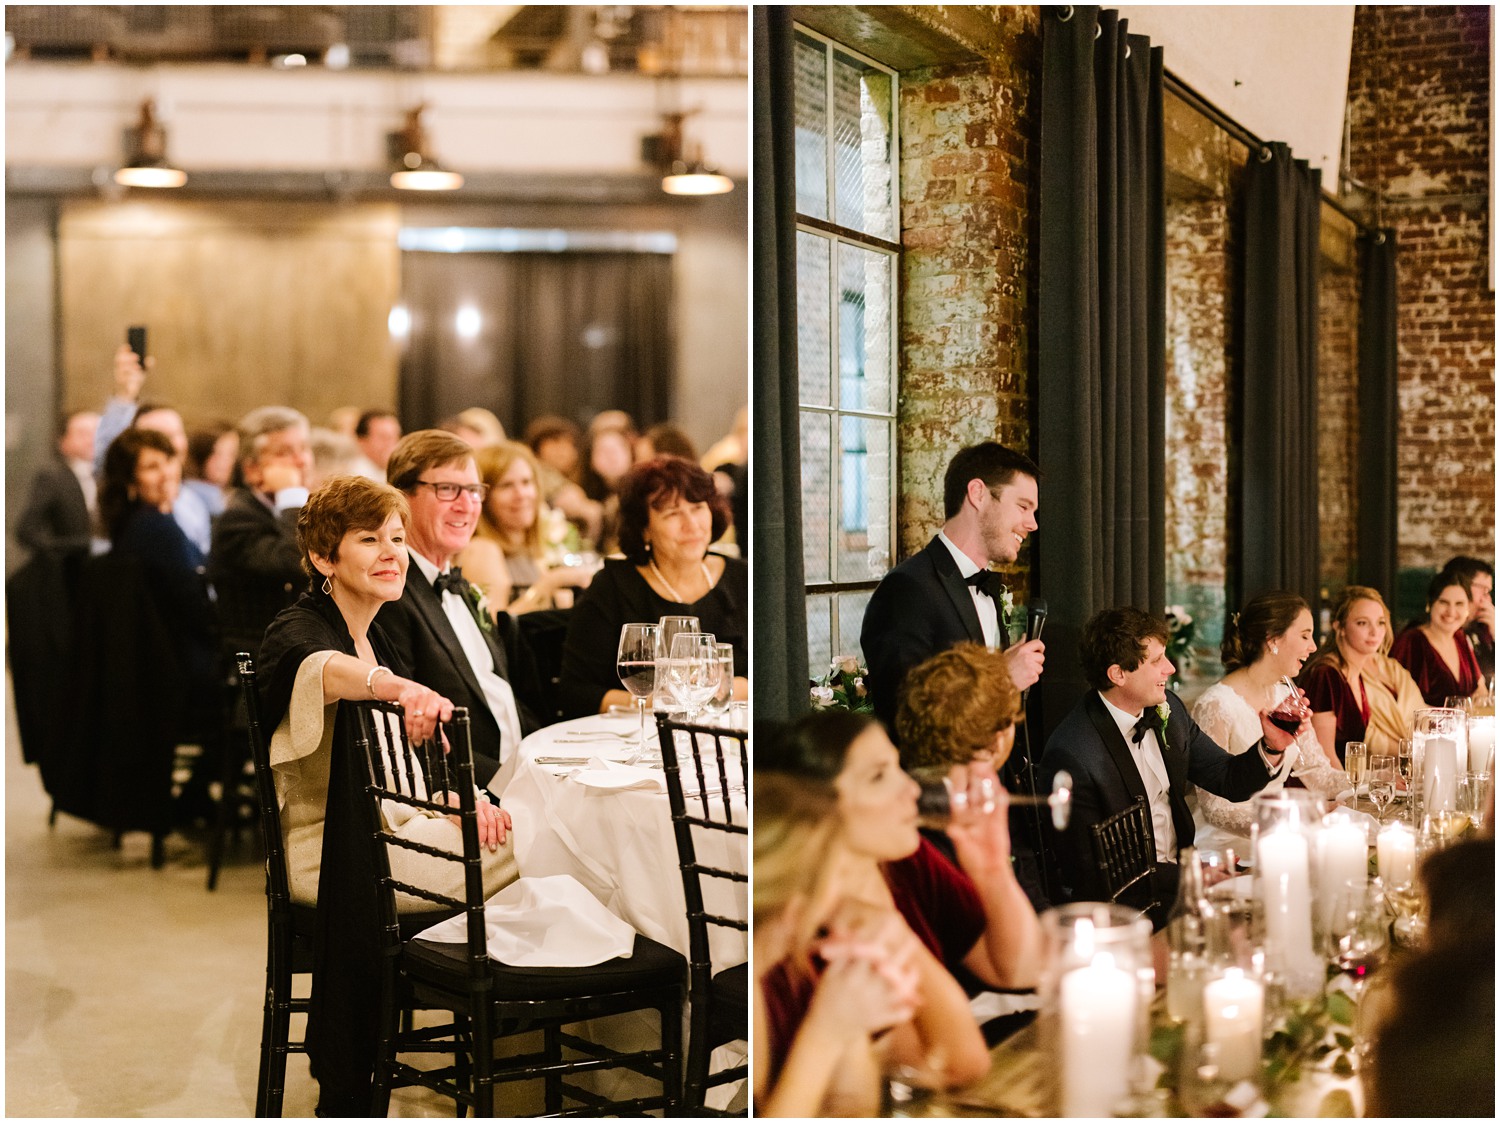 Chelsea Renay Photography photographs wedding toasts at the Cadillac Service Garage in NC